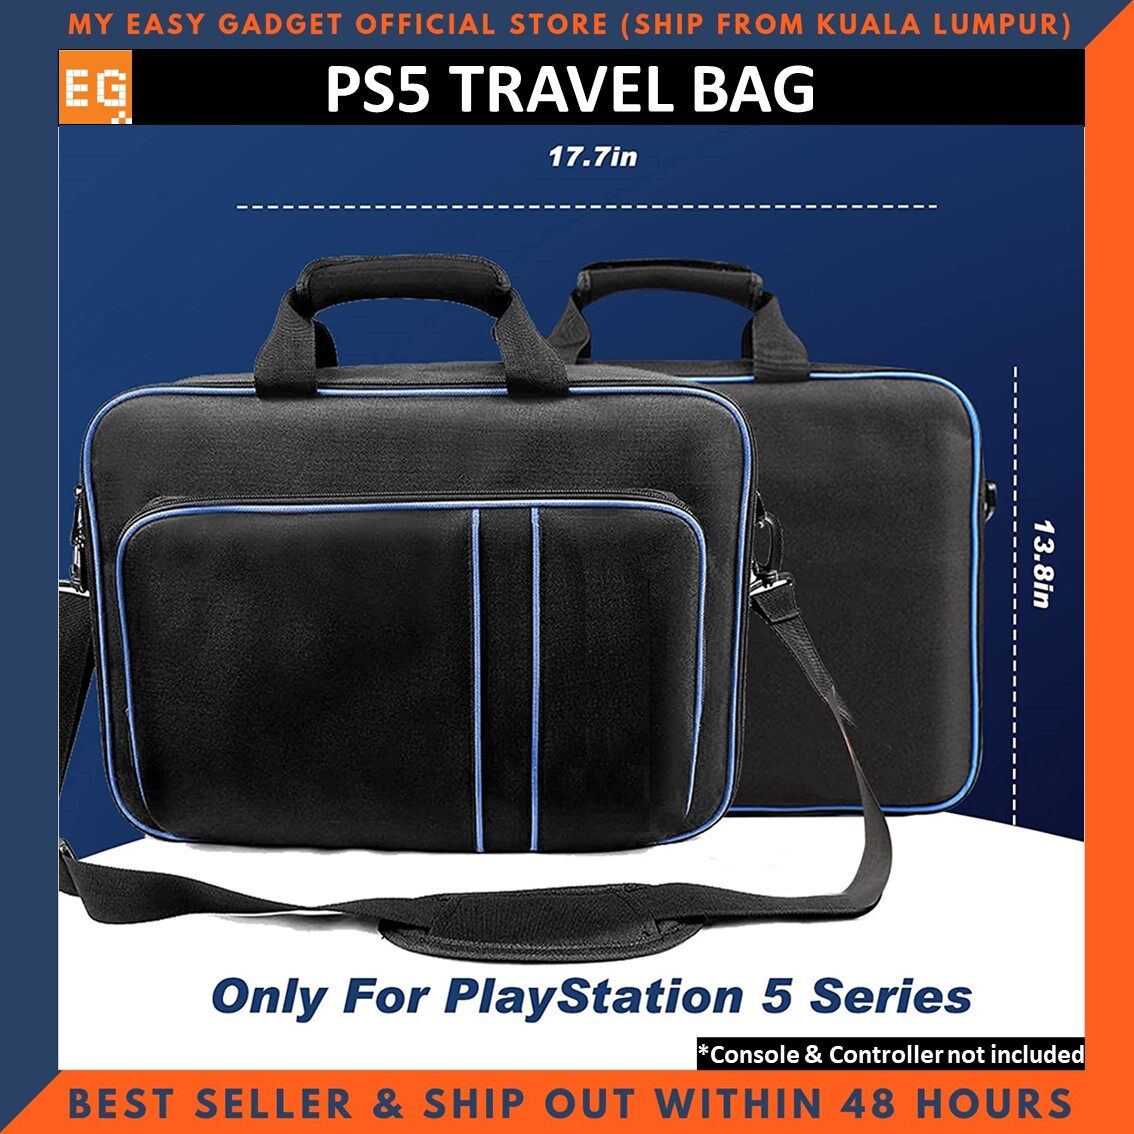 PS4 PS5 Bag Canvas Carry Bag Case Protective Travel Storage Carry Handbag Outdoor Travel Waterproof Nylon Playstation 4 5